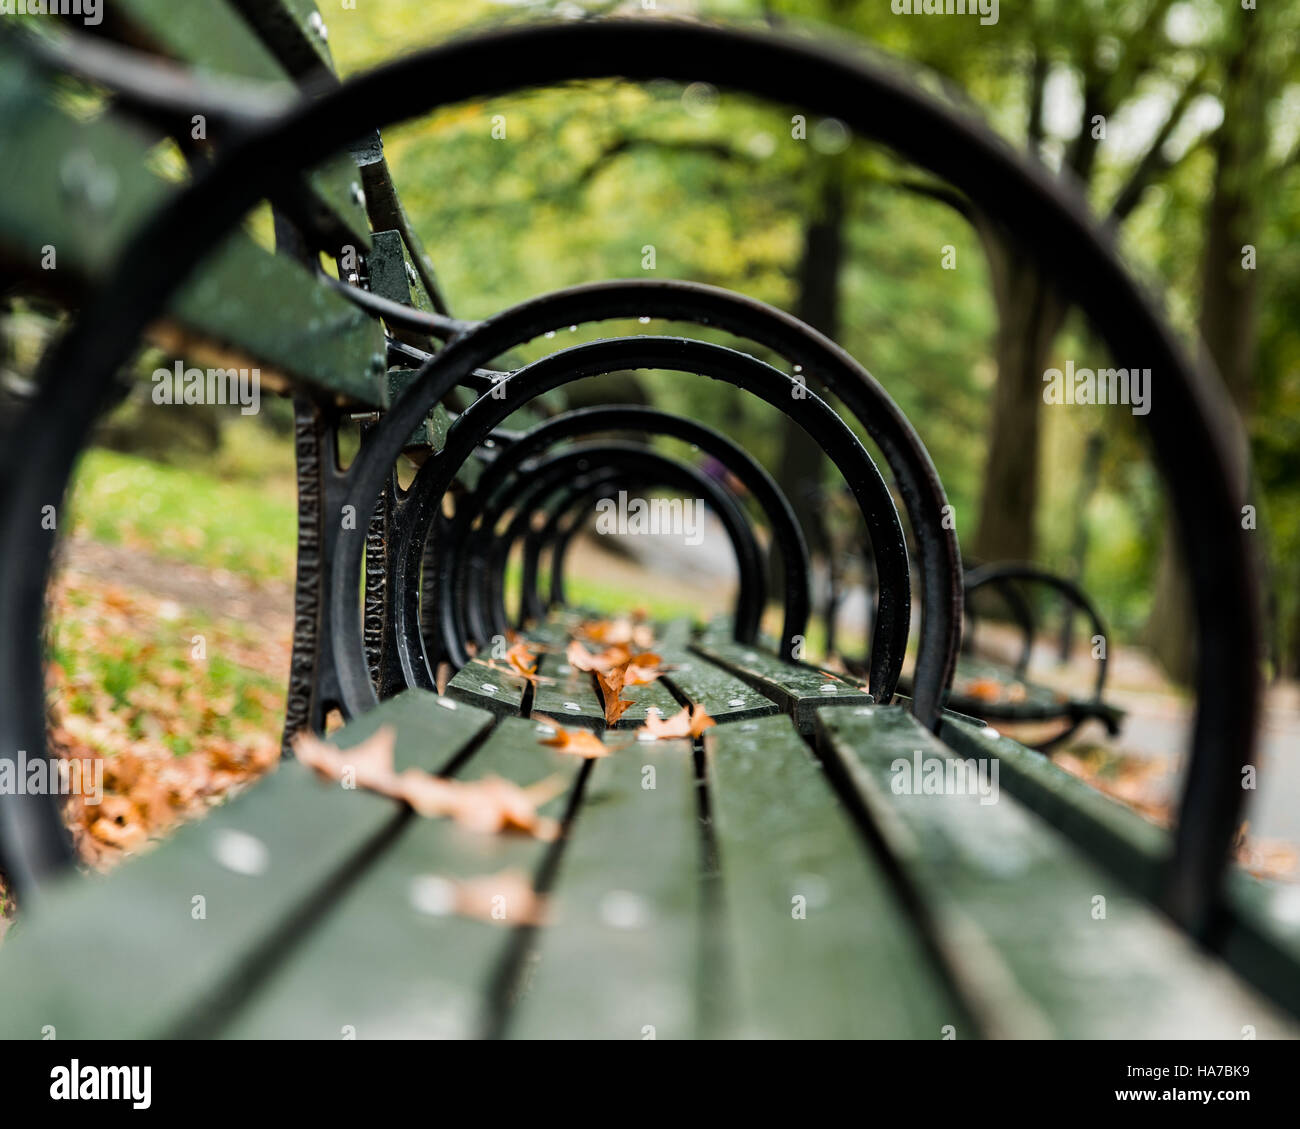 Photo taken at a low vantage point of park bench which gives a tunnel effect when looking through the loops. Stock Photo